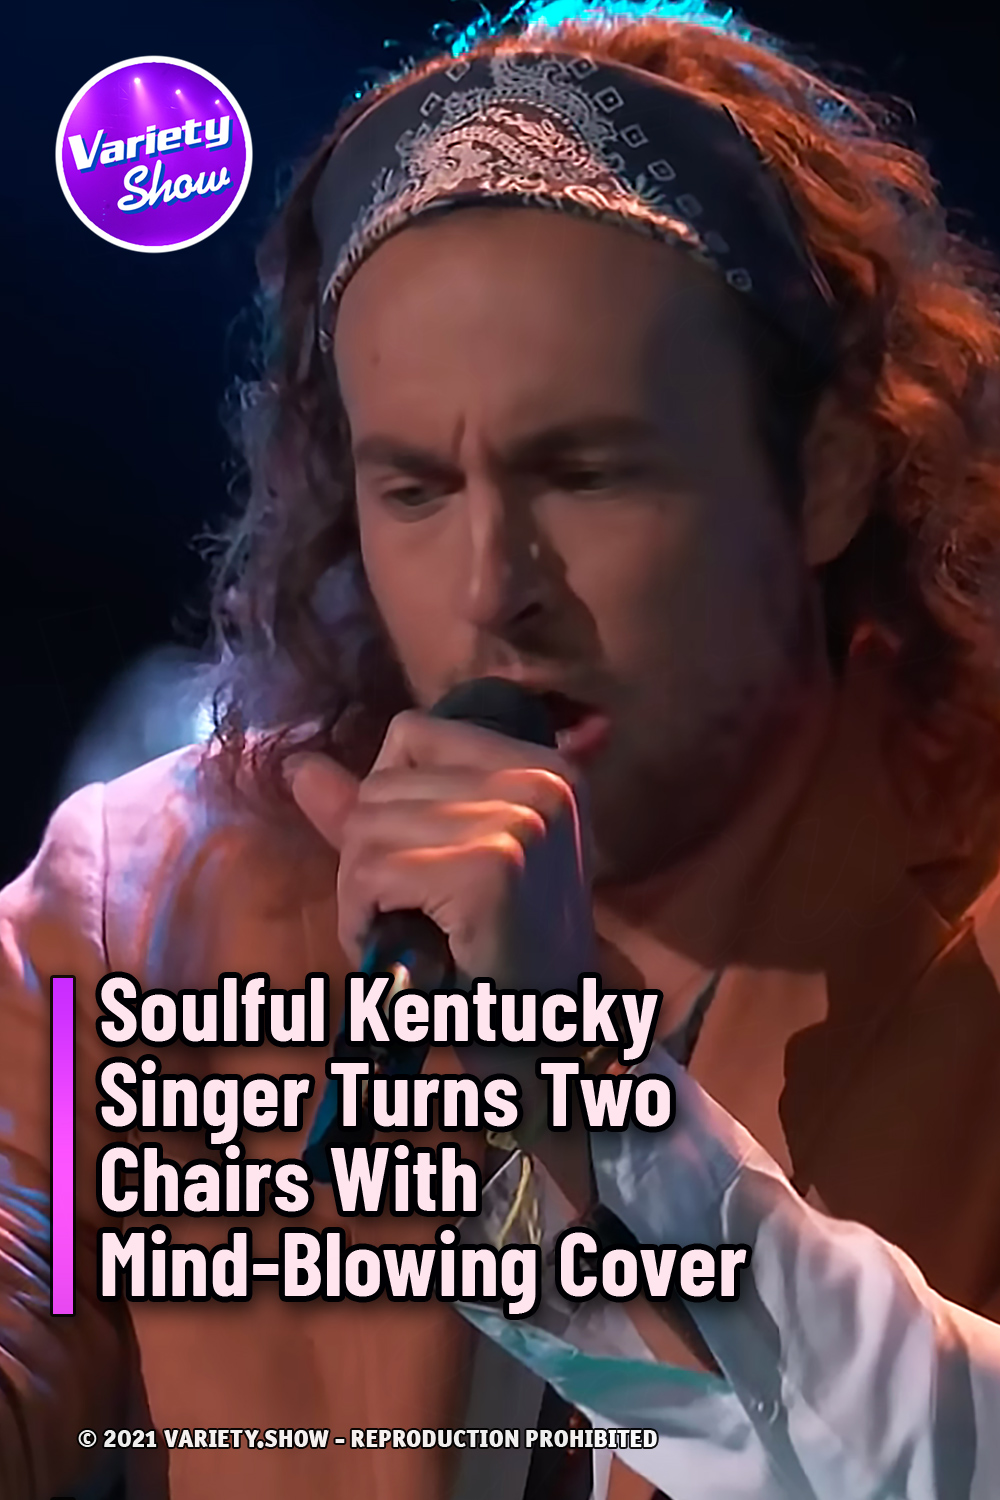 Soulful Kentucky Singer Turns Two Chairs With Mind-Blowing Cover